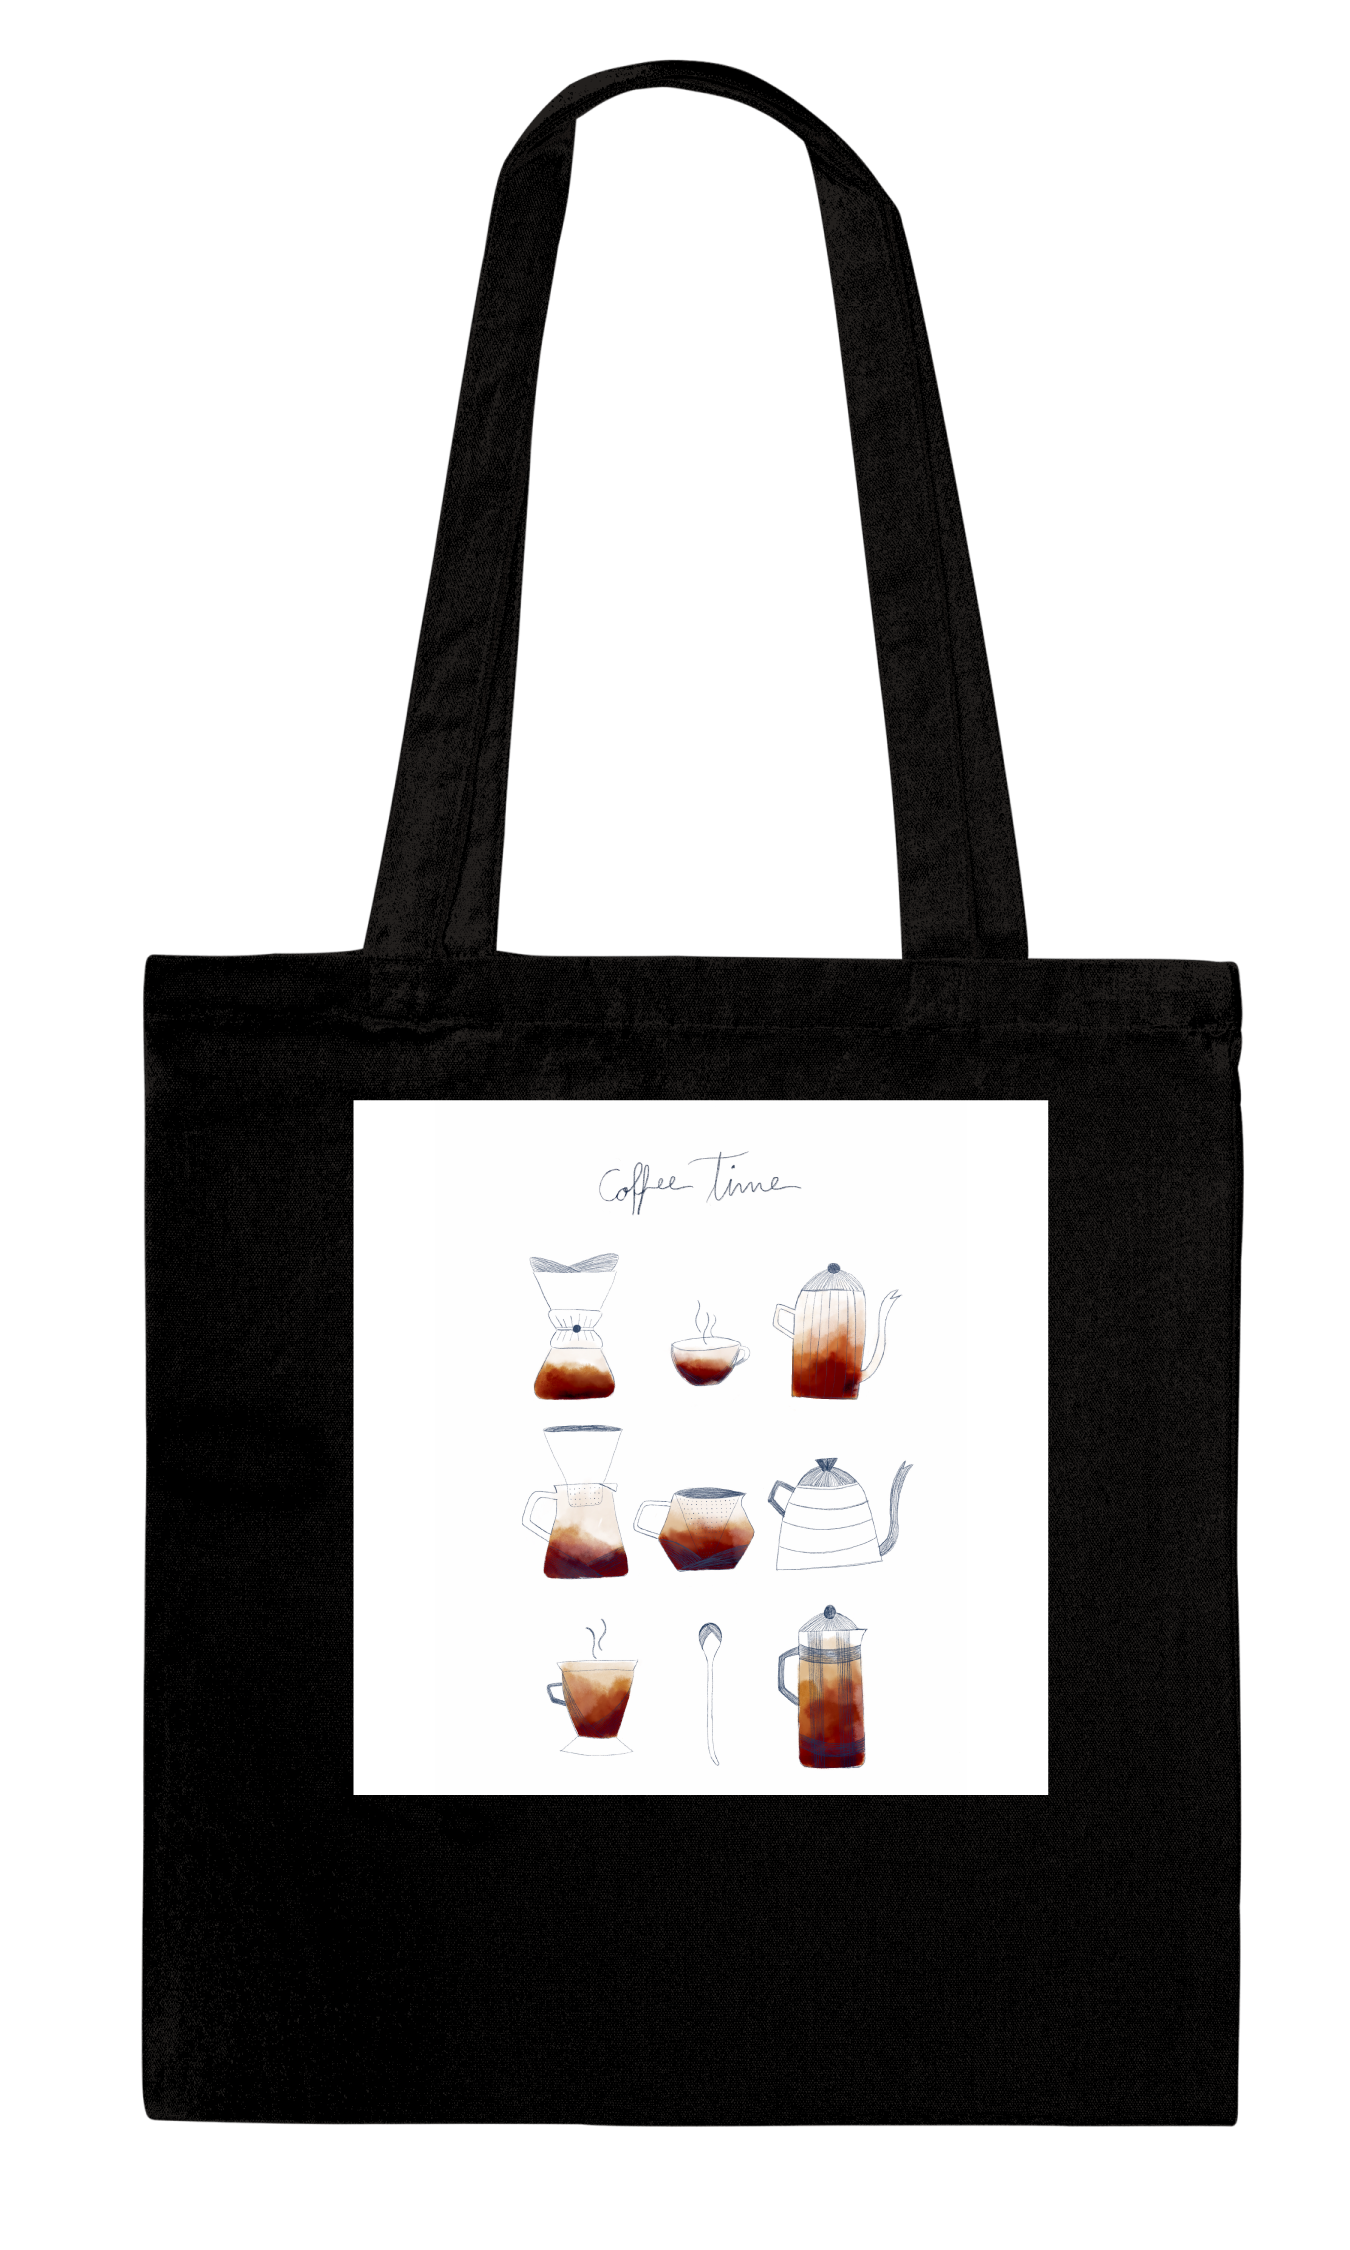 Coffee Time Tote Bag -  コーヒータイムトートバッグ